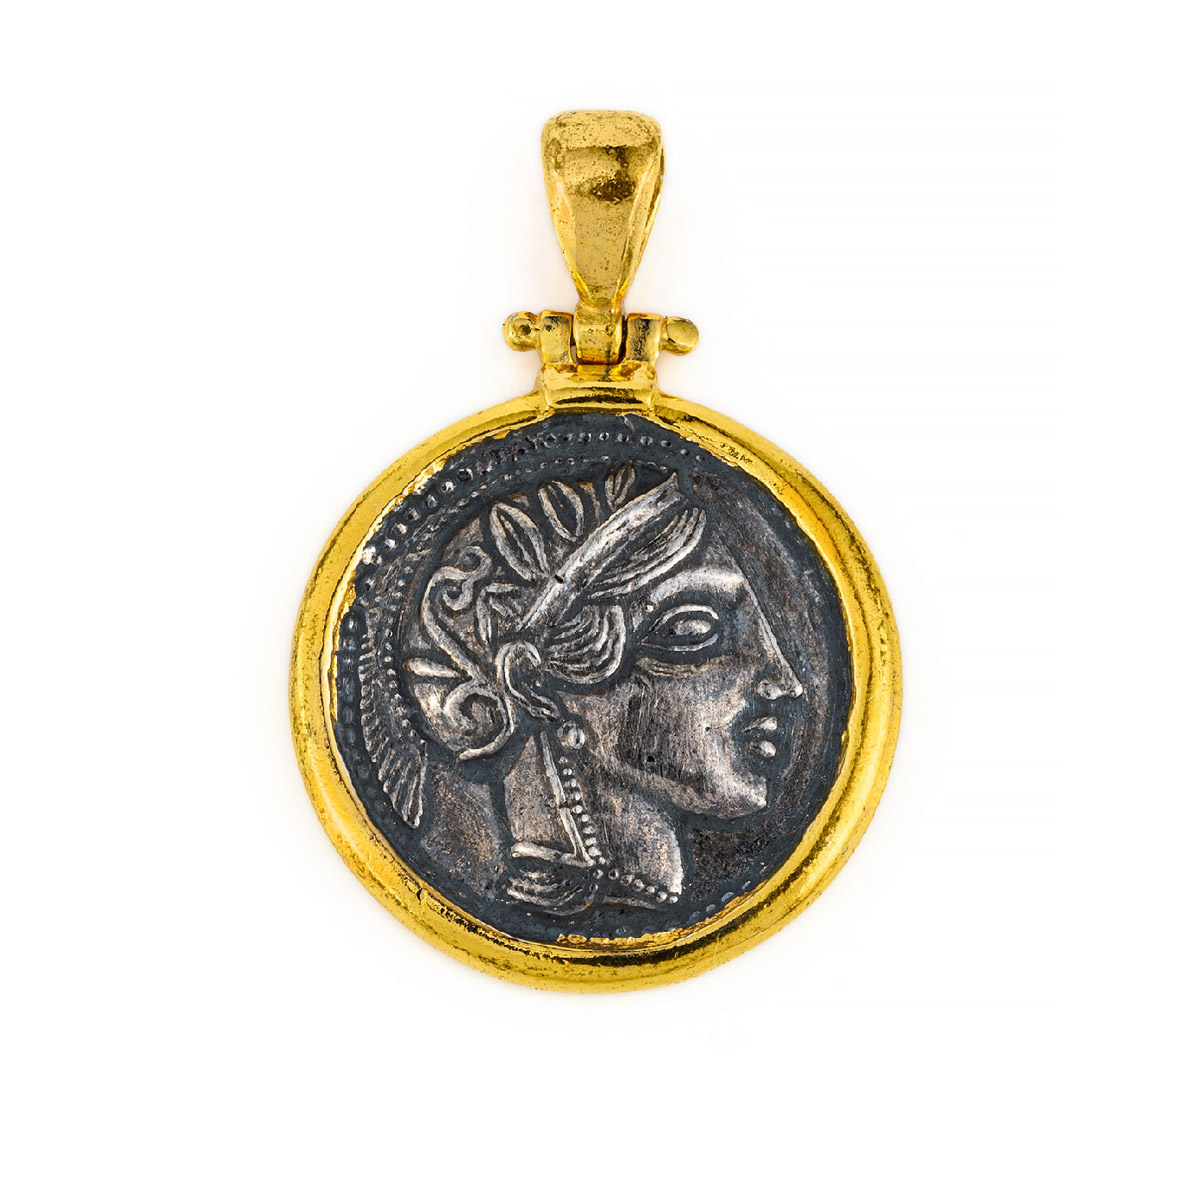 Amazon.com: CoinageArt -Greek Coin Necklace 2 Drachma with Greece Owl  Symbol of Goddess Athena on Brilliant Adjustable Stainless Steel Chain and  Hematite Gemstone. : Handmade Products